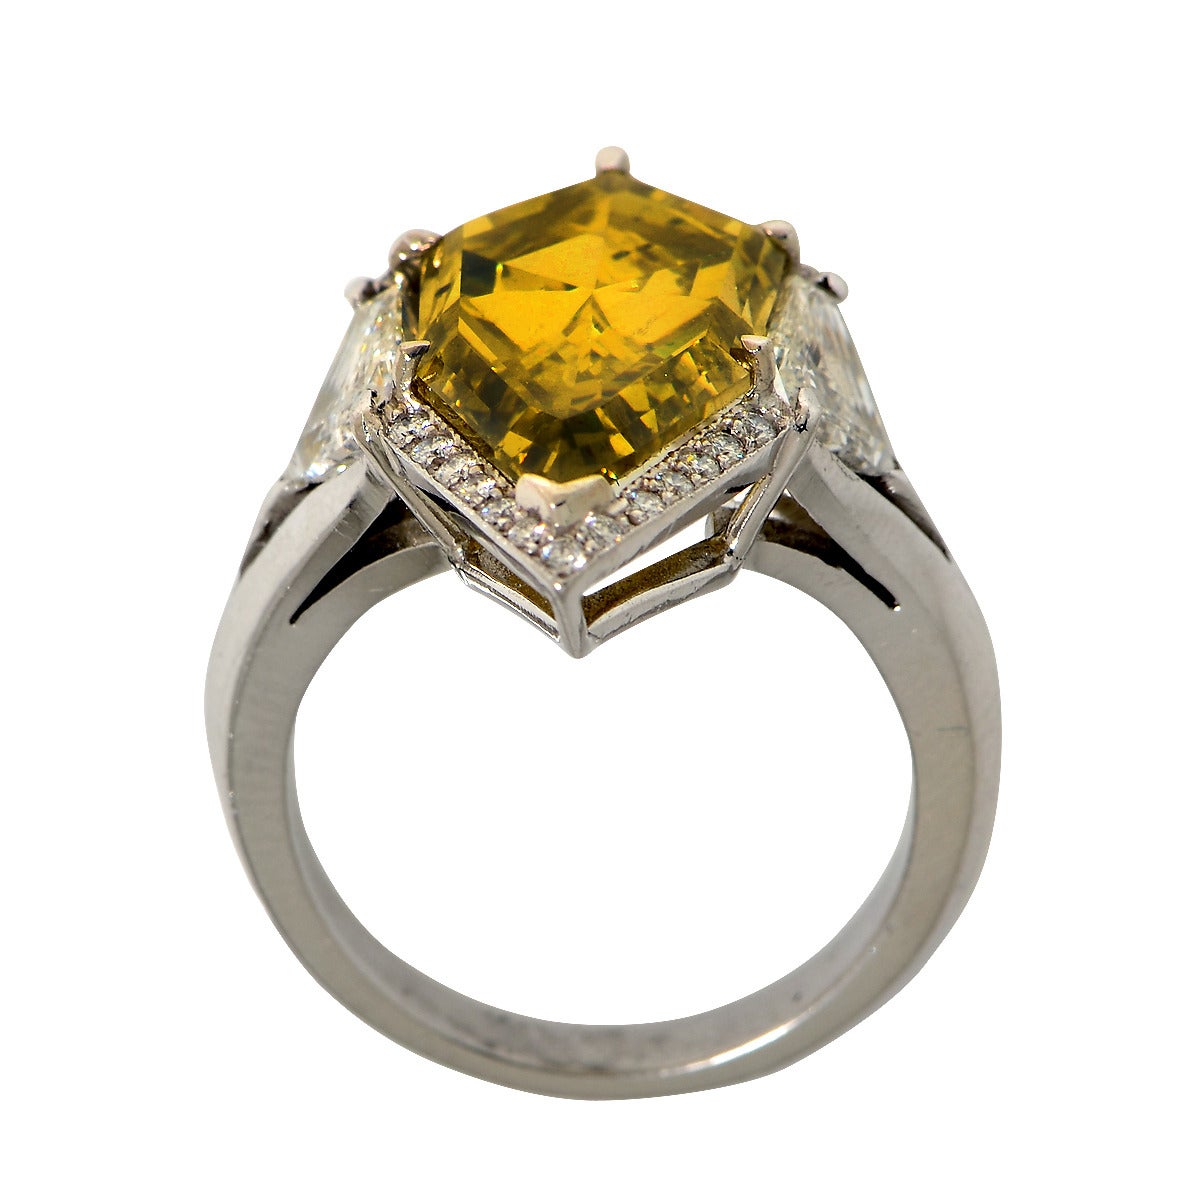 This gorgeous platinum ring features a GIA graded natural fancy deep brownish greenish yellow kite shaped diamond weighing 7.94ct accented by 1.20cts of round brilliant cut and kite cut diamonds, G color, VS clarity. Total diamond weight is